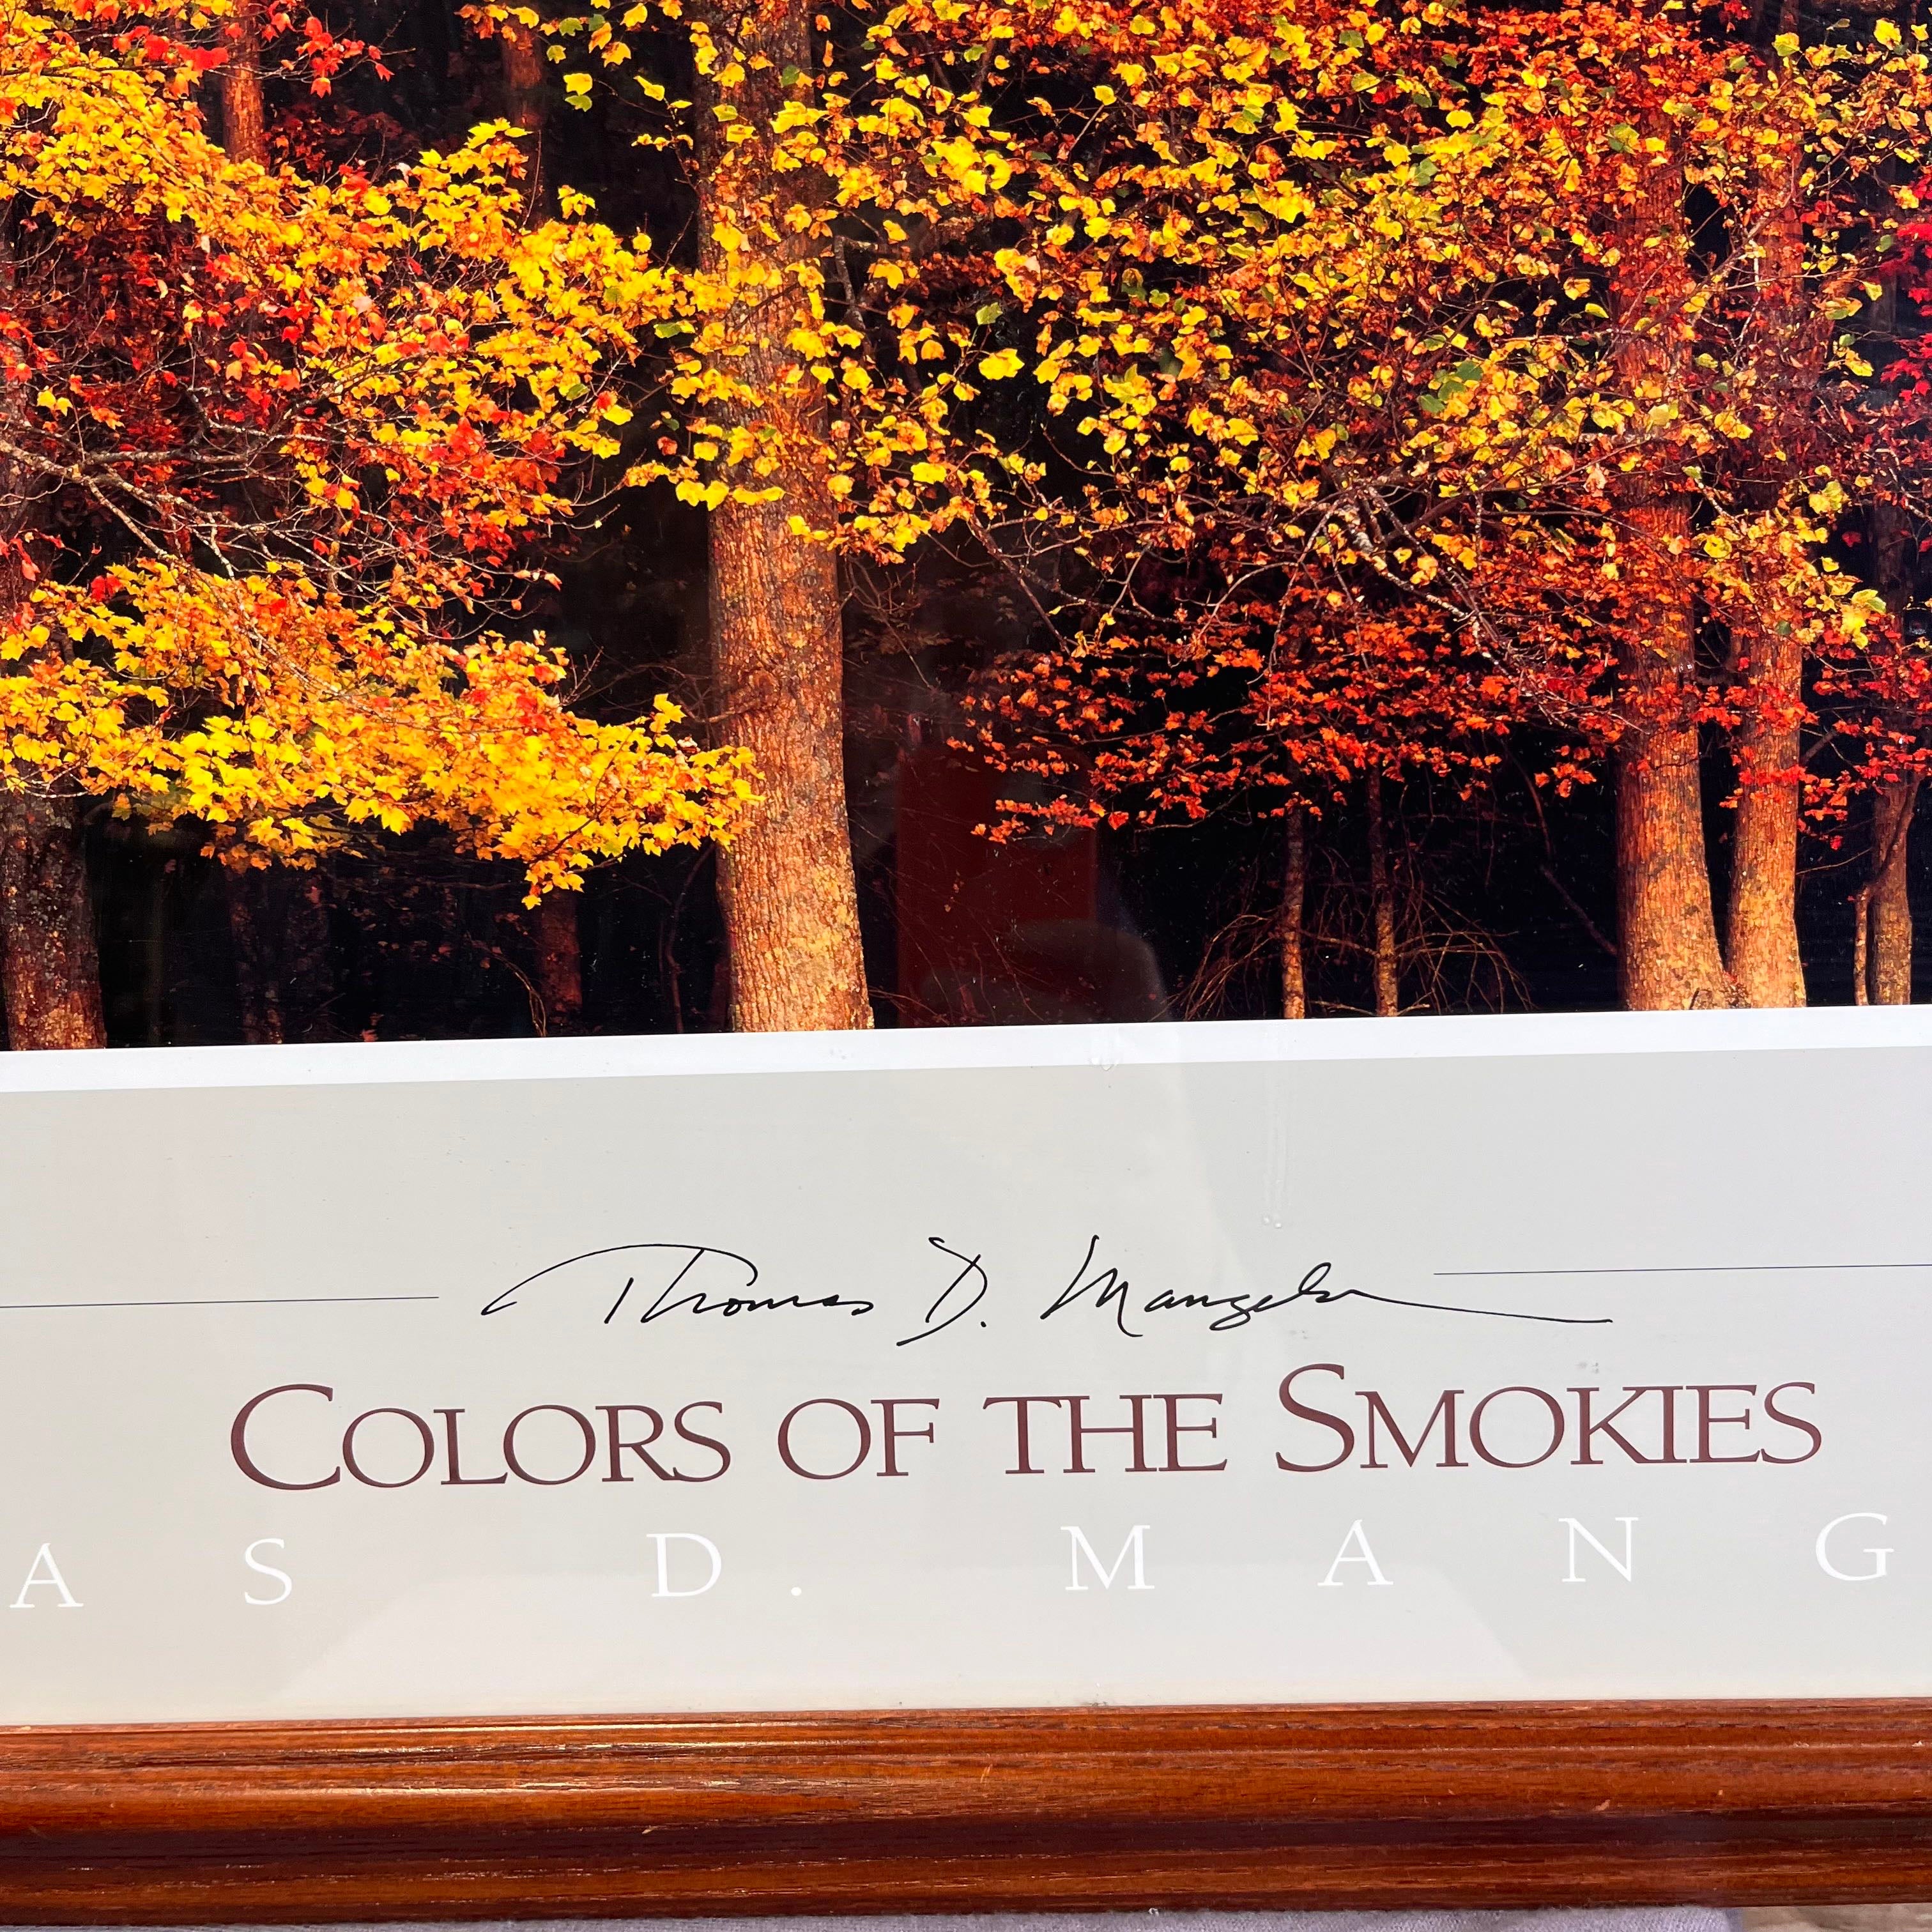 "Colors of the Smokies" by Thomas Mangelson Photographic Print